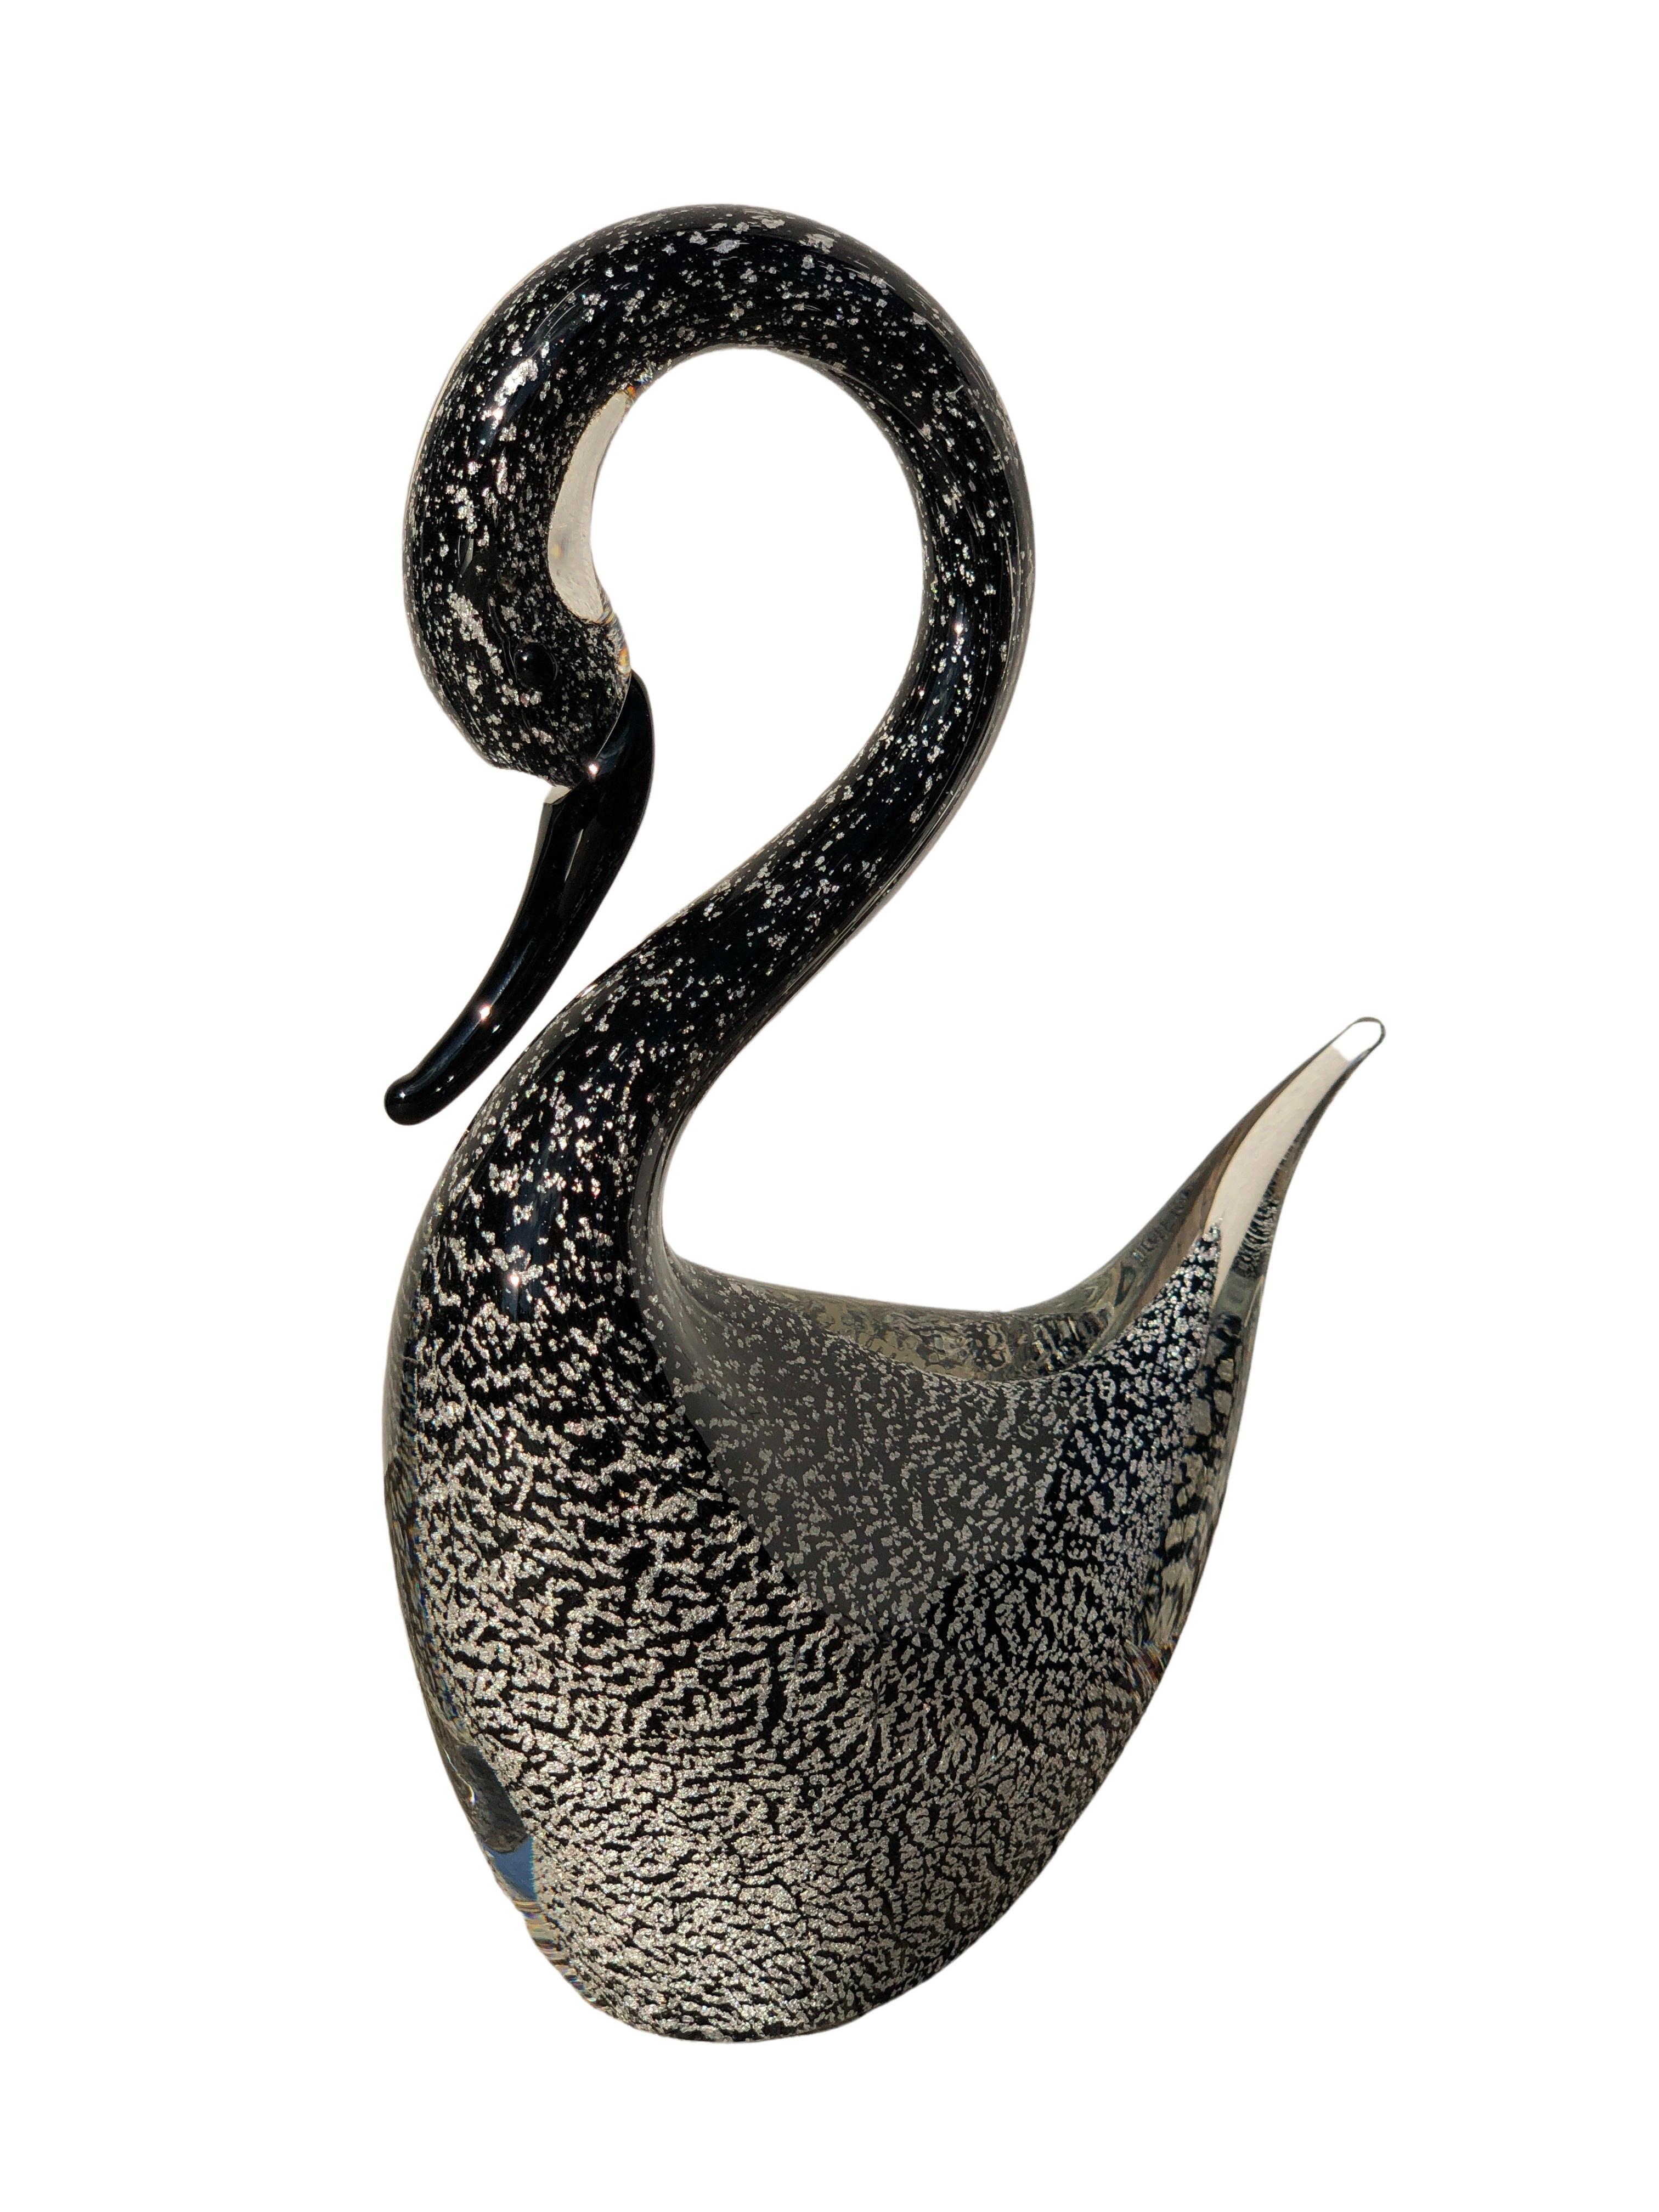 Italian Murano Art Glass Silver Flecked Swan Figurine by Formia, Italy, 1960s For Sale